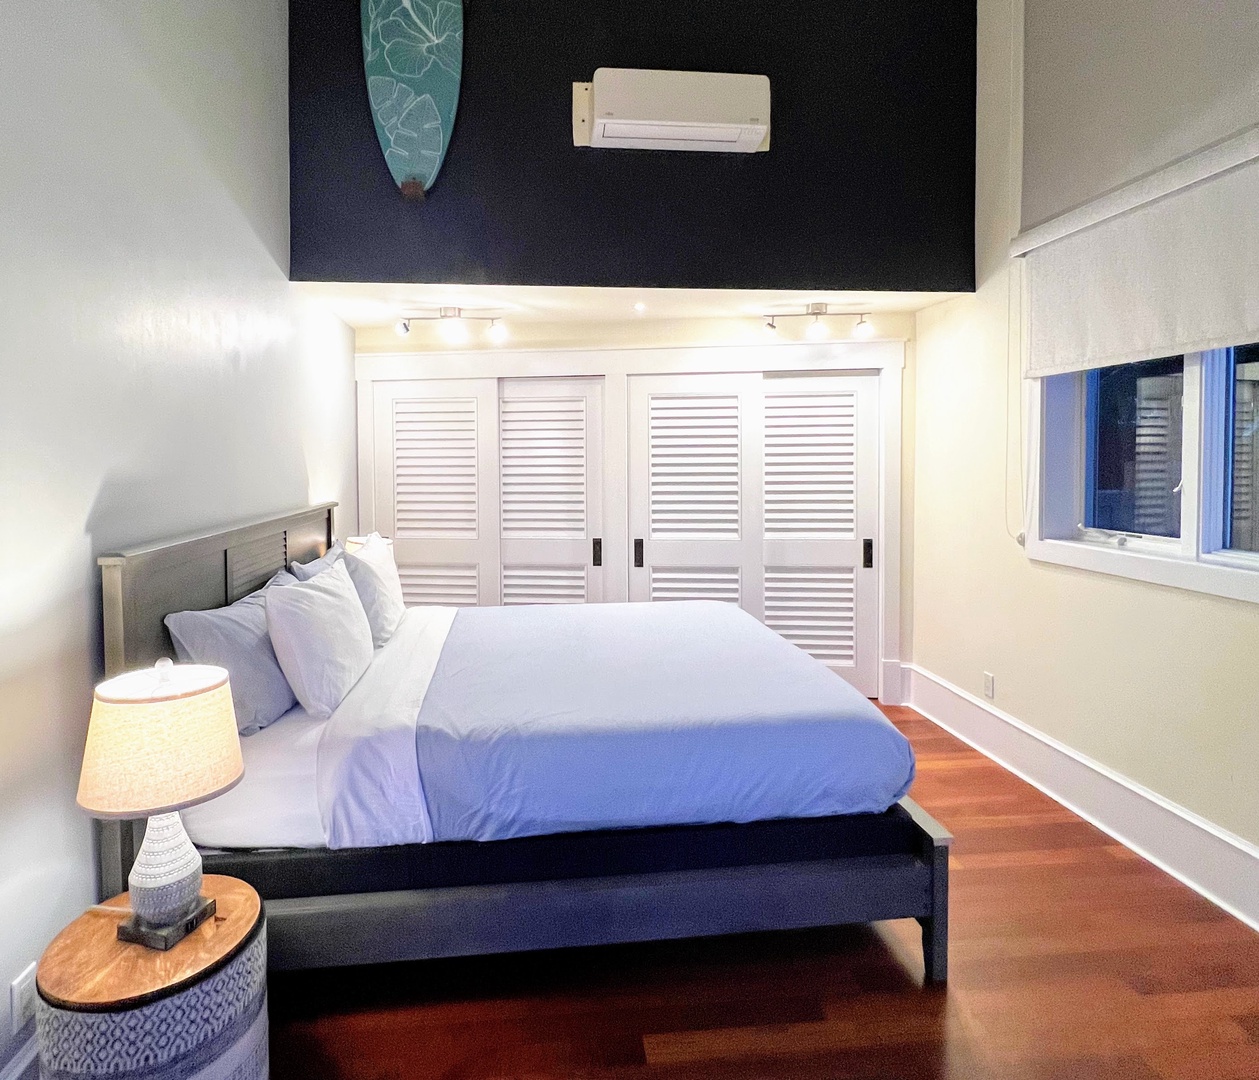 Kailua Vacation Rentals, Lanikai Villa* - Guest Bedroom 3 is equipped with a king bed, garden views, and split A/C